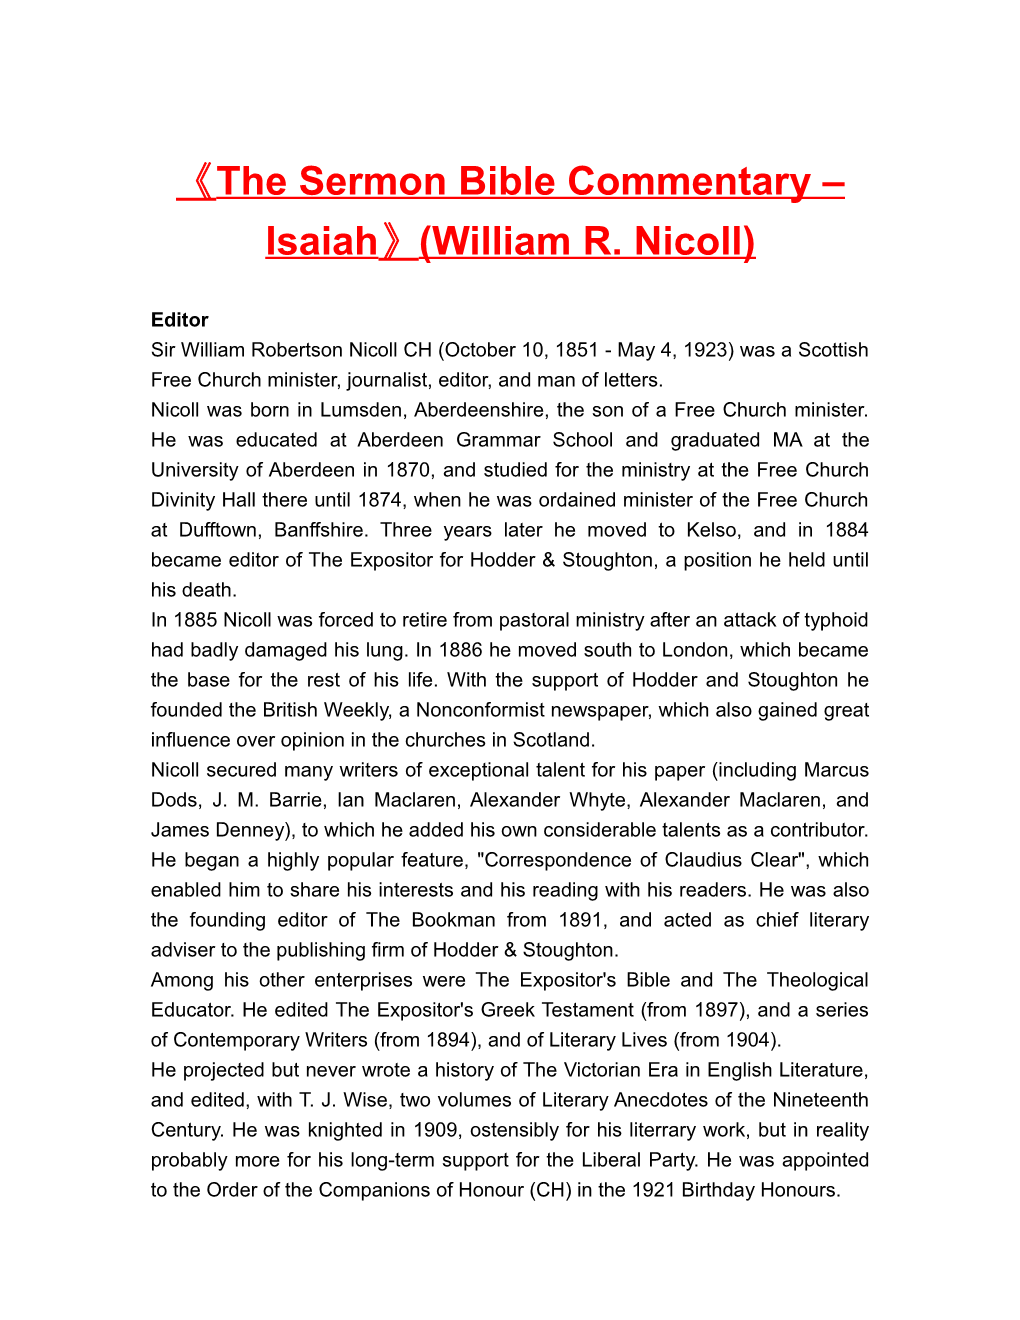 The Sermon Bible Commentary Isaiah (William R. Nicoll)